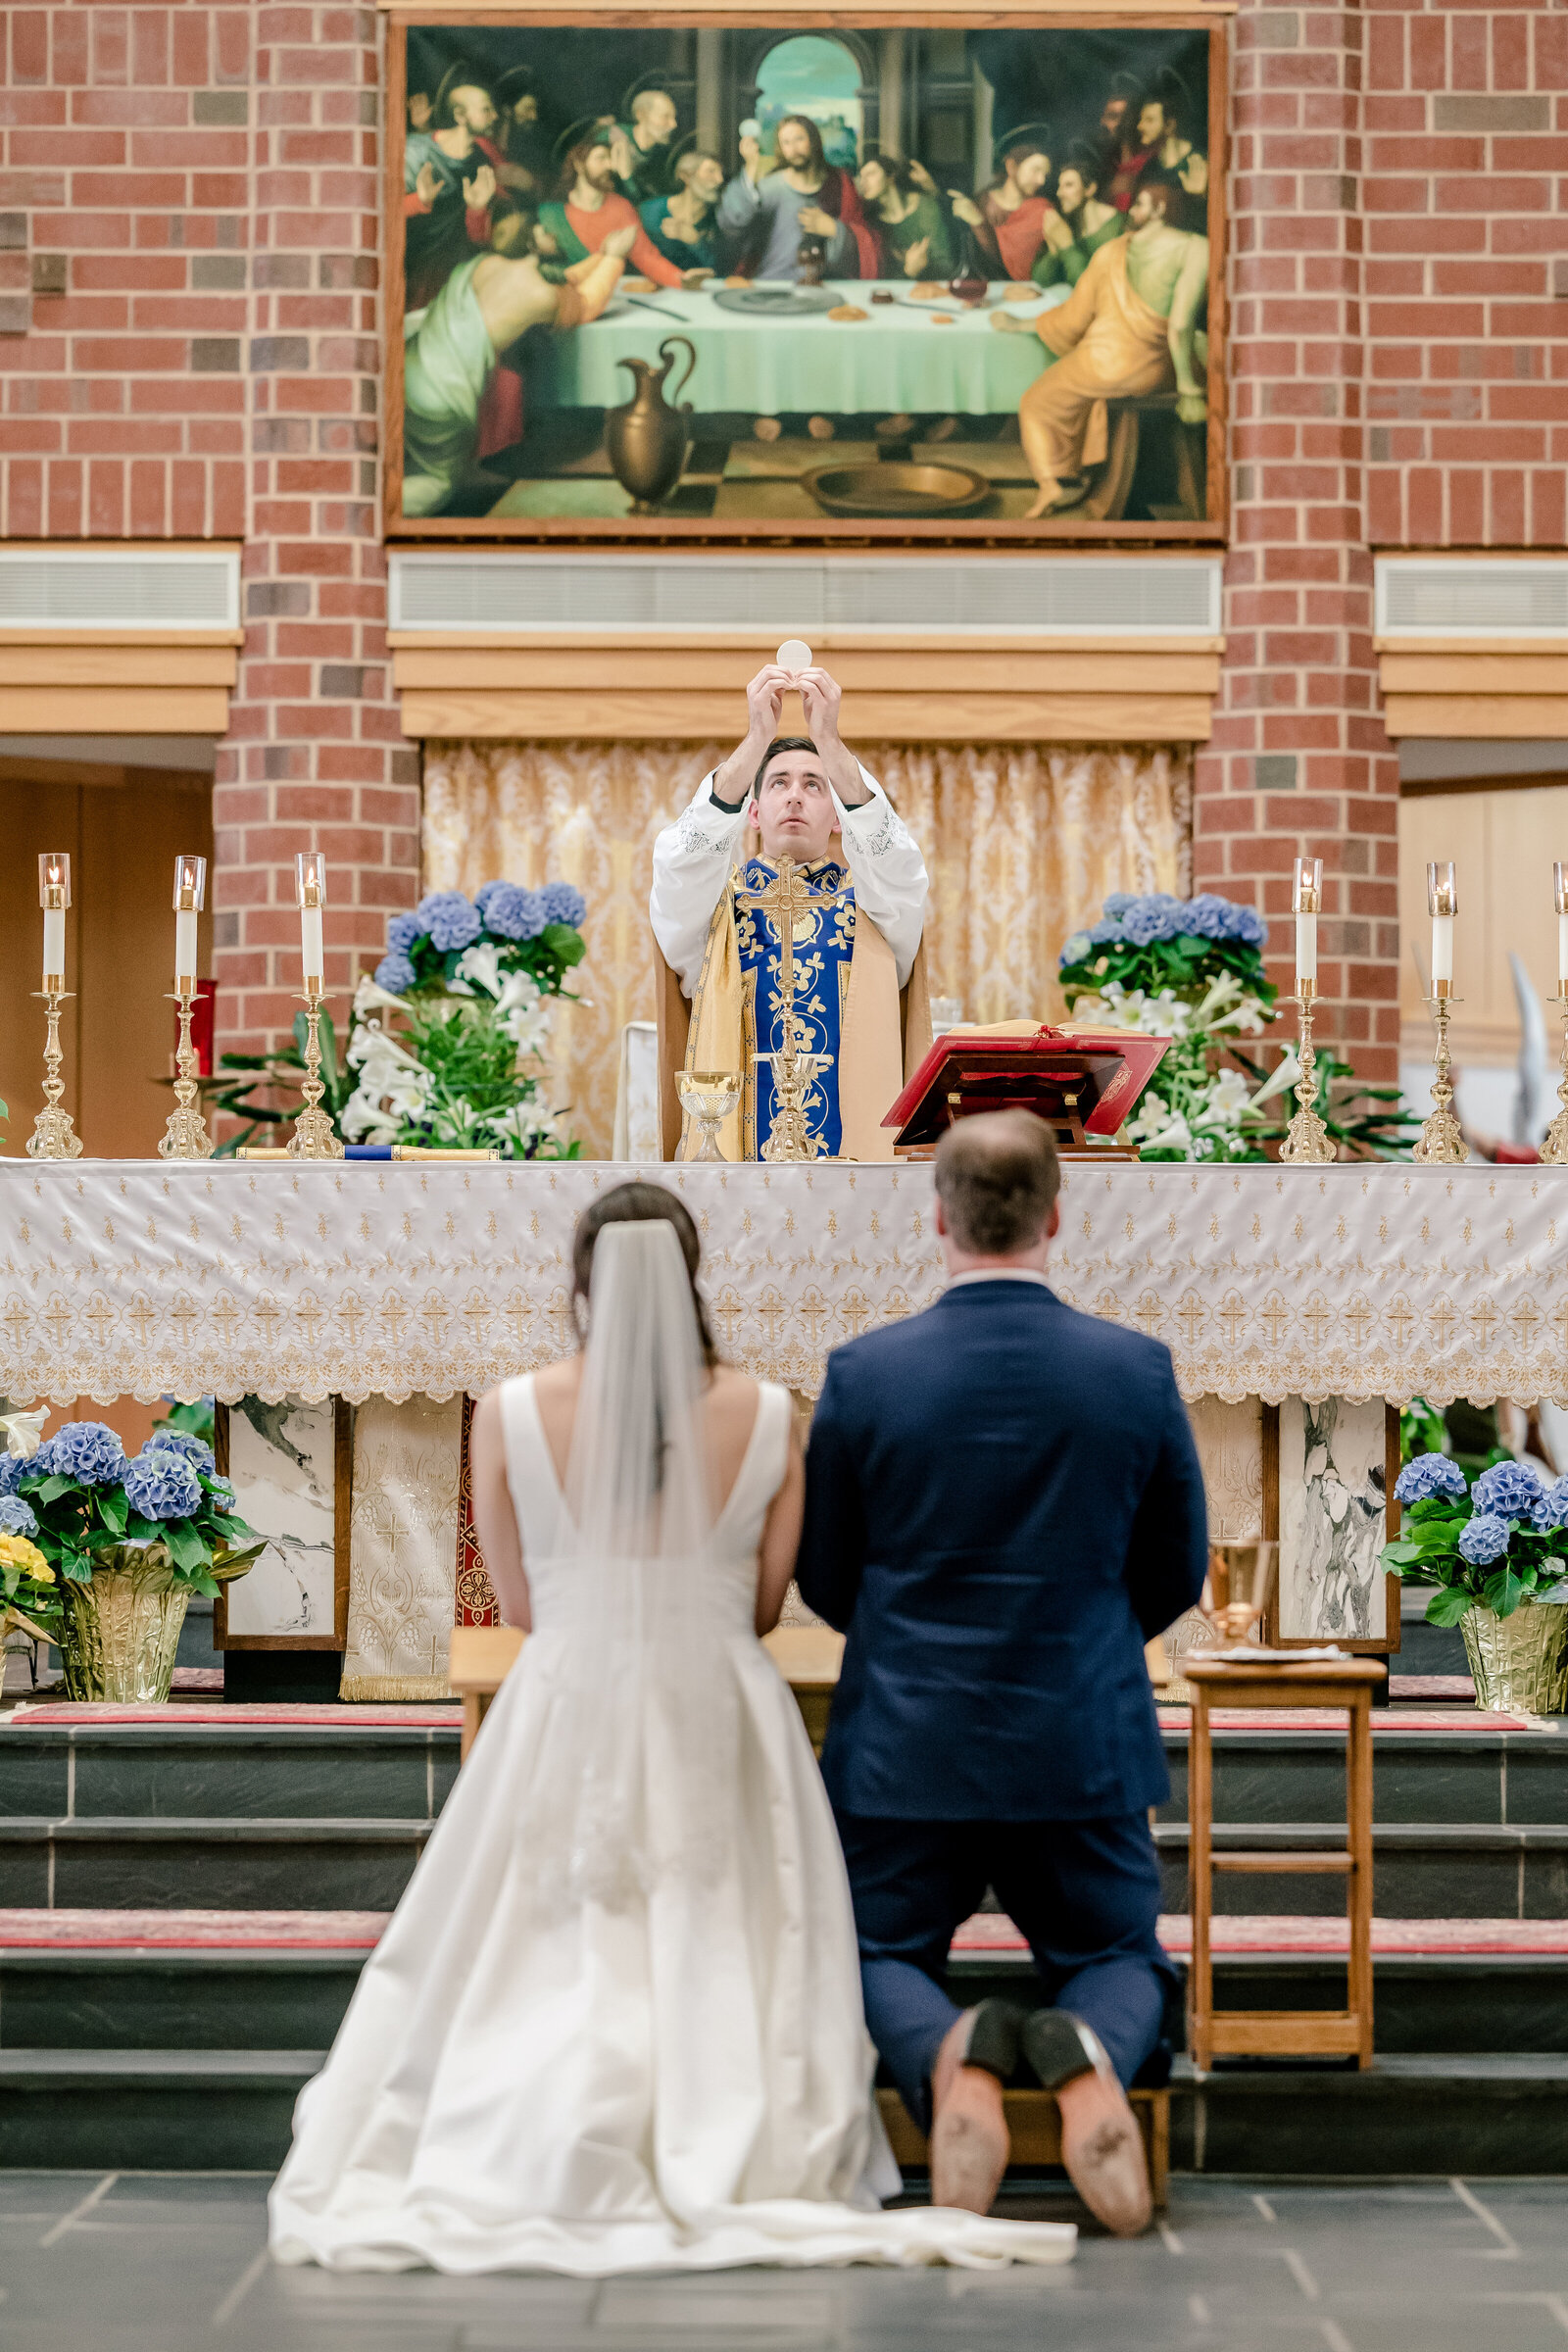 The moment of Consecration during a Catholic wedding in Northern Virginia